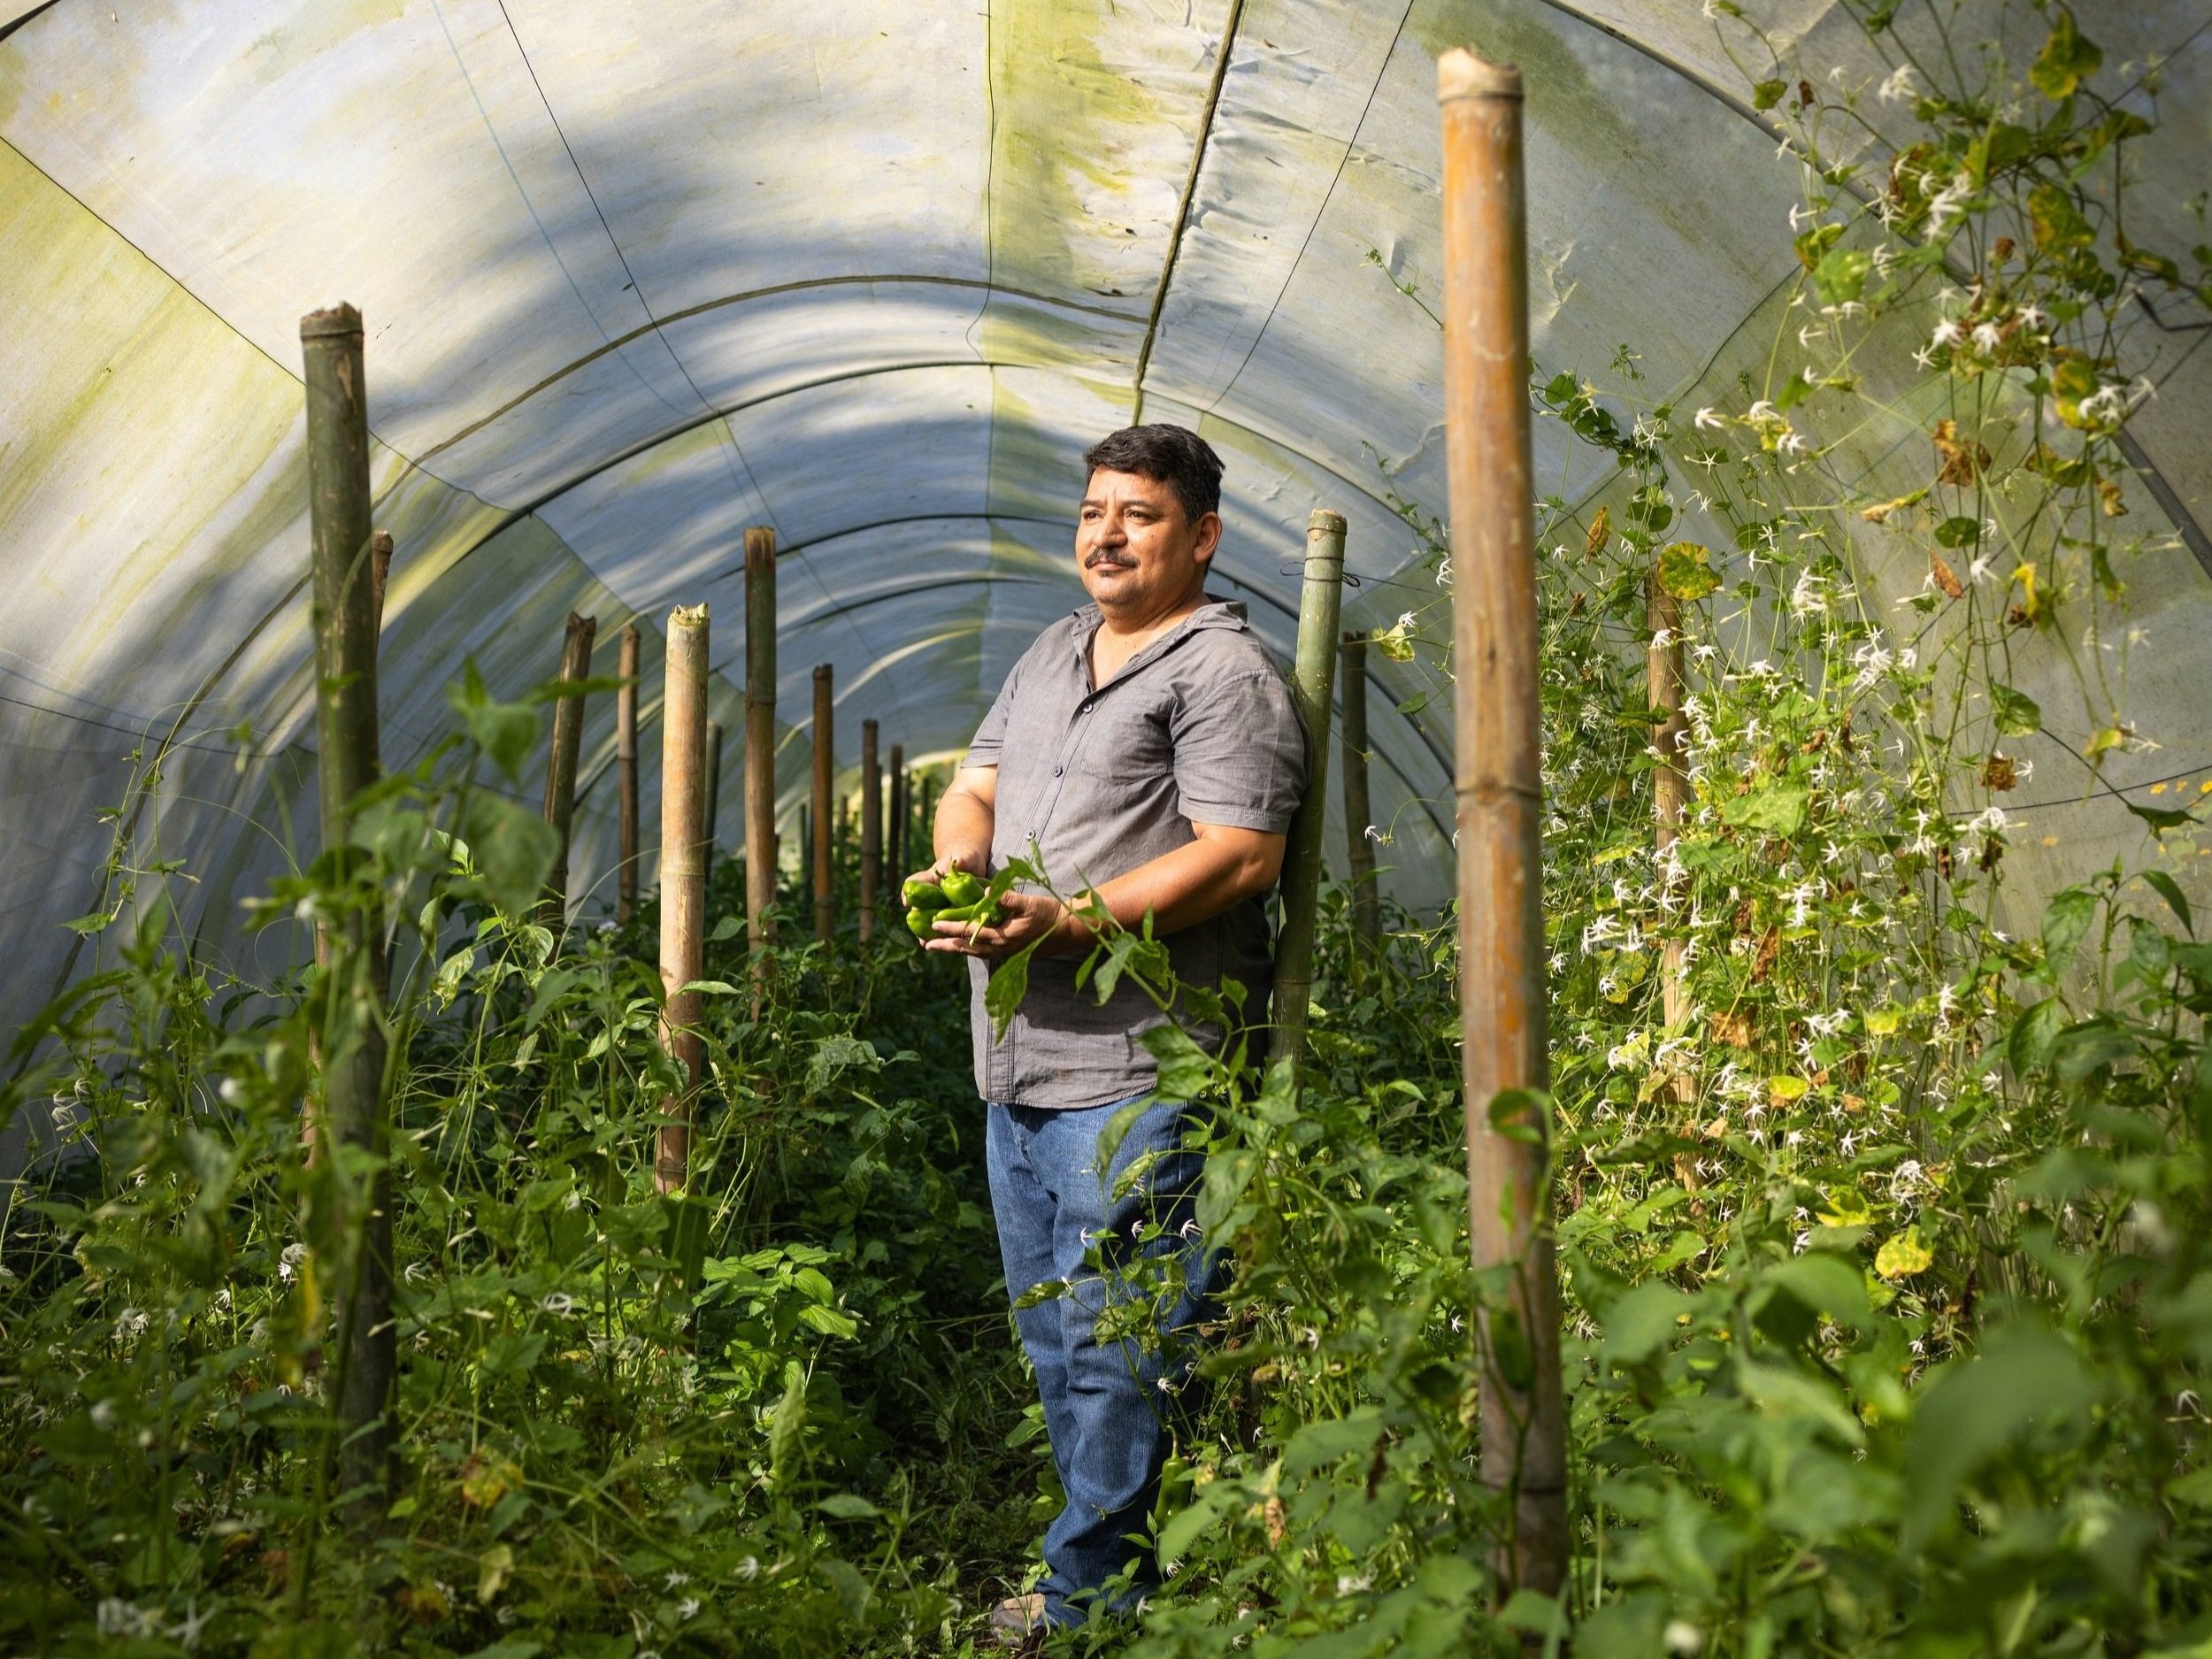  Walter Gomez picks peppers inside a greenhouse at EcoCentro.  